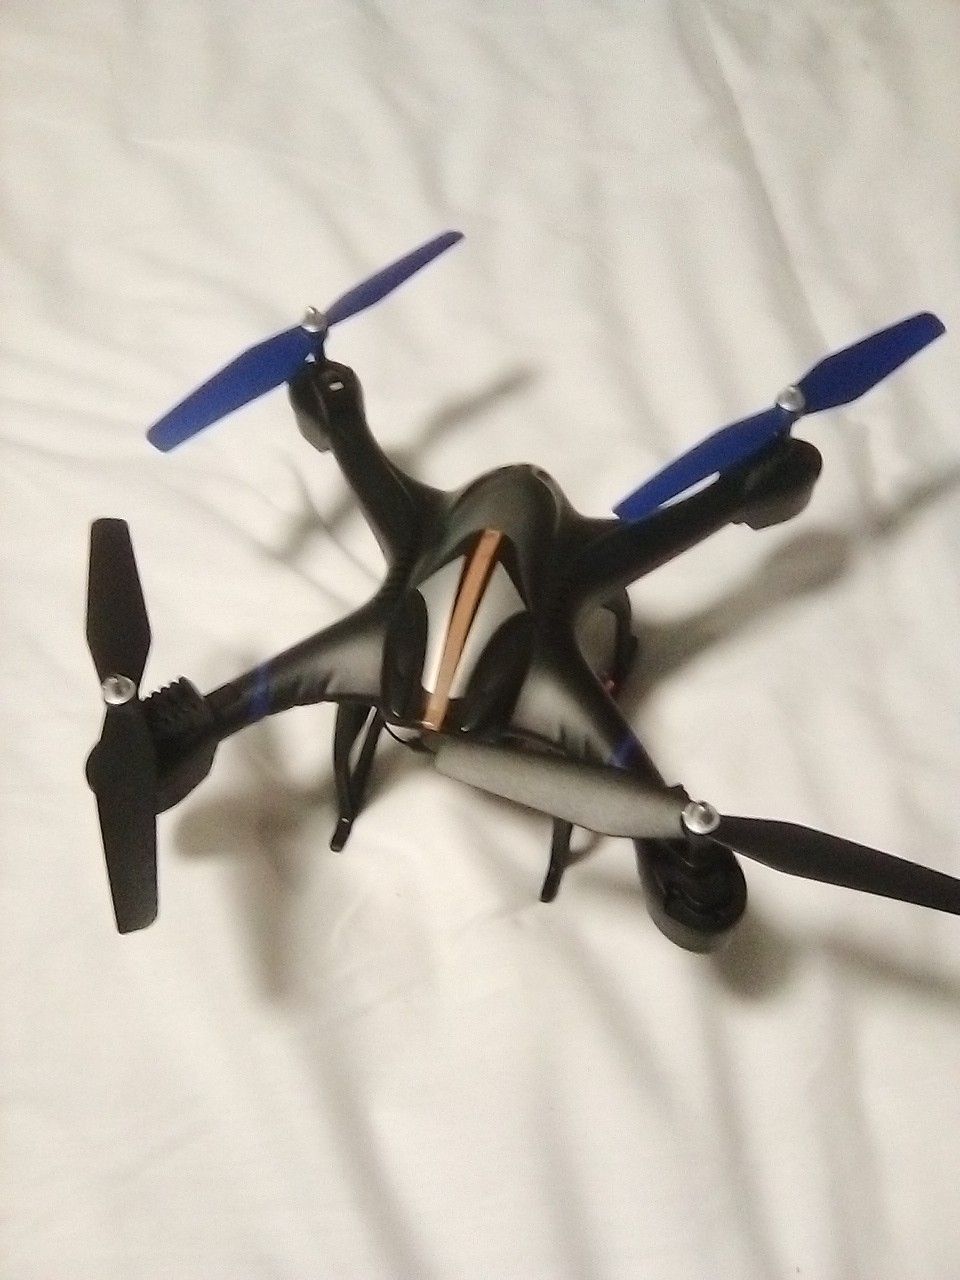 Drone don't know the model don't have the controller $40